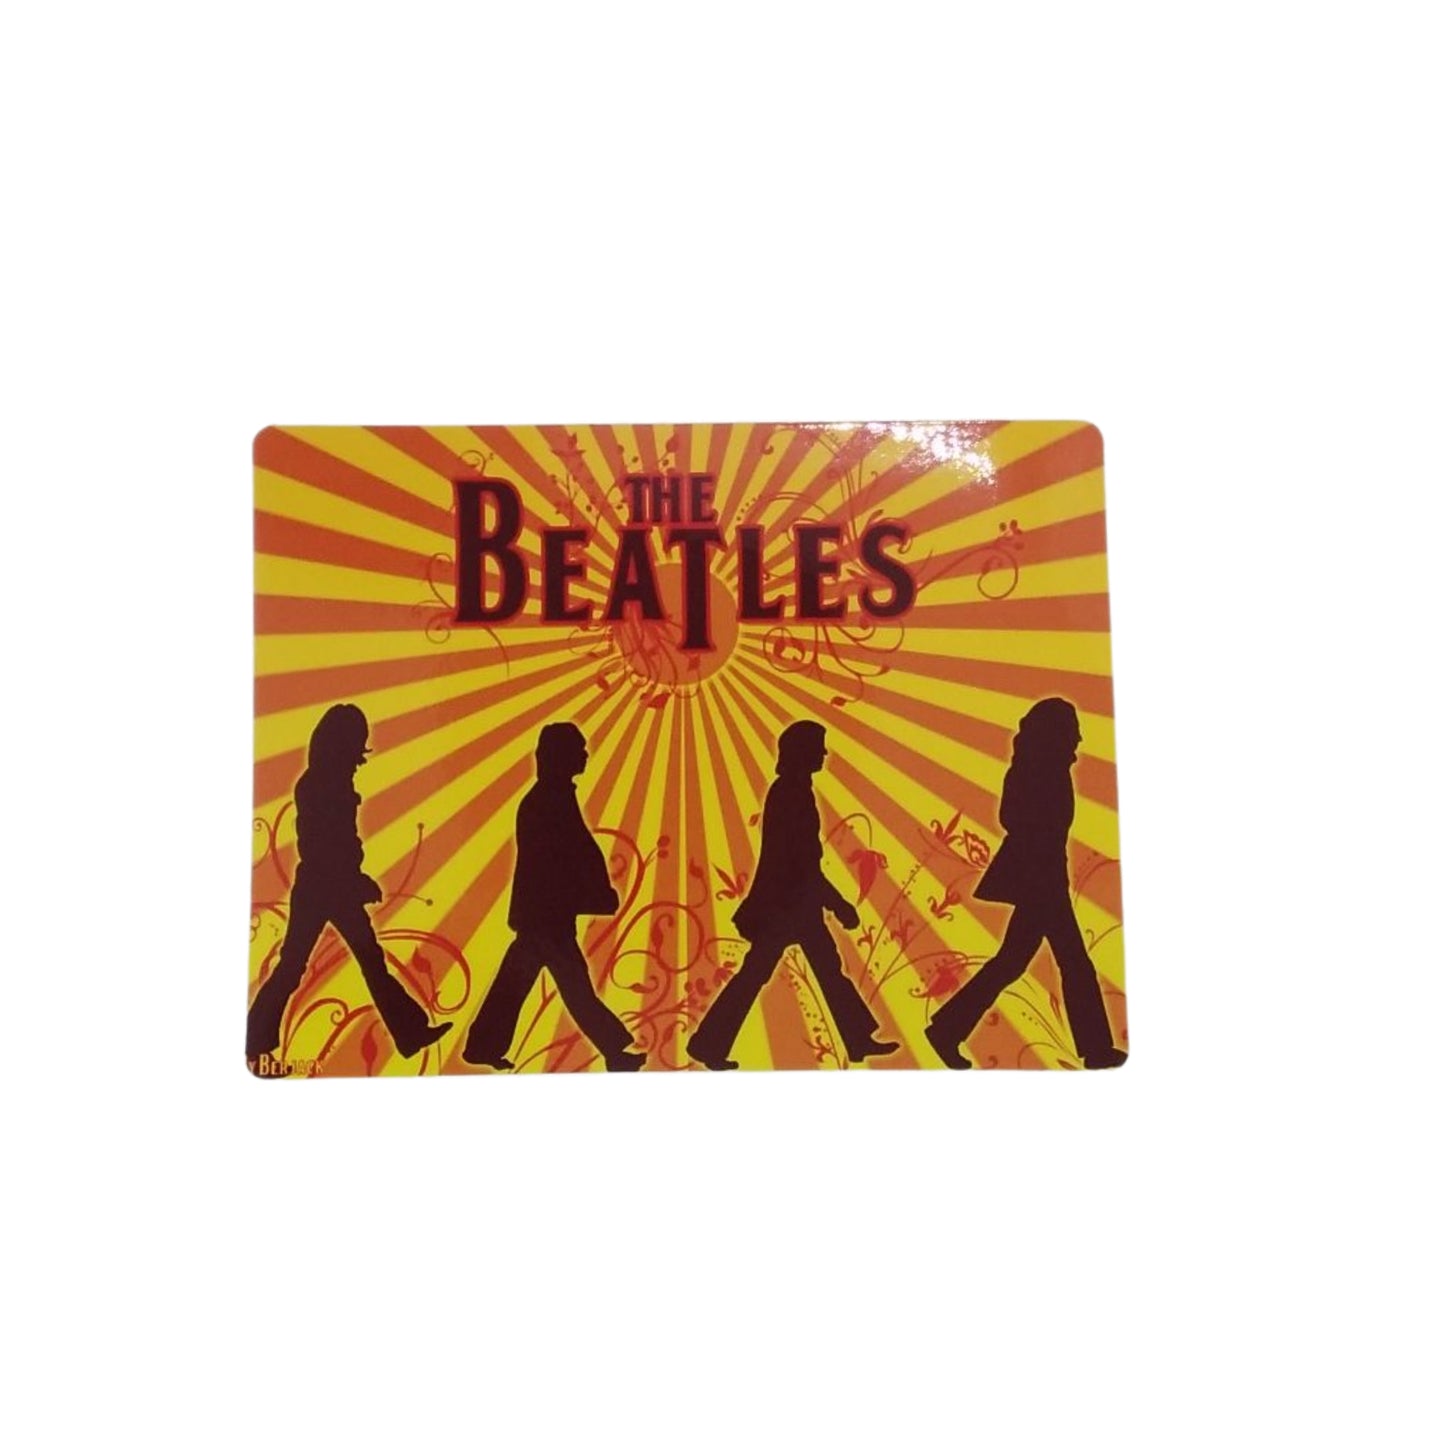 The Beatles, Here Comes the Sun, Abbey Road - Sticker